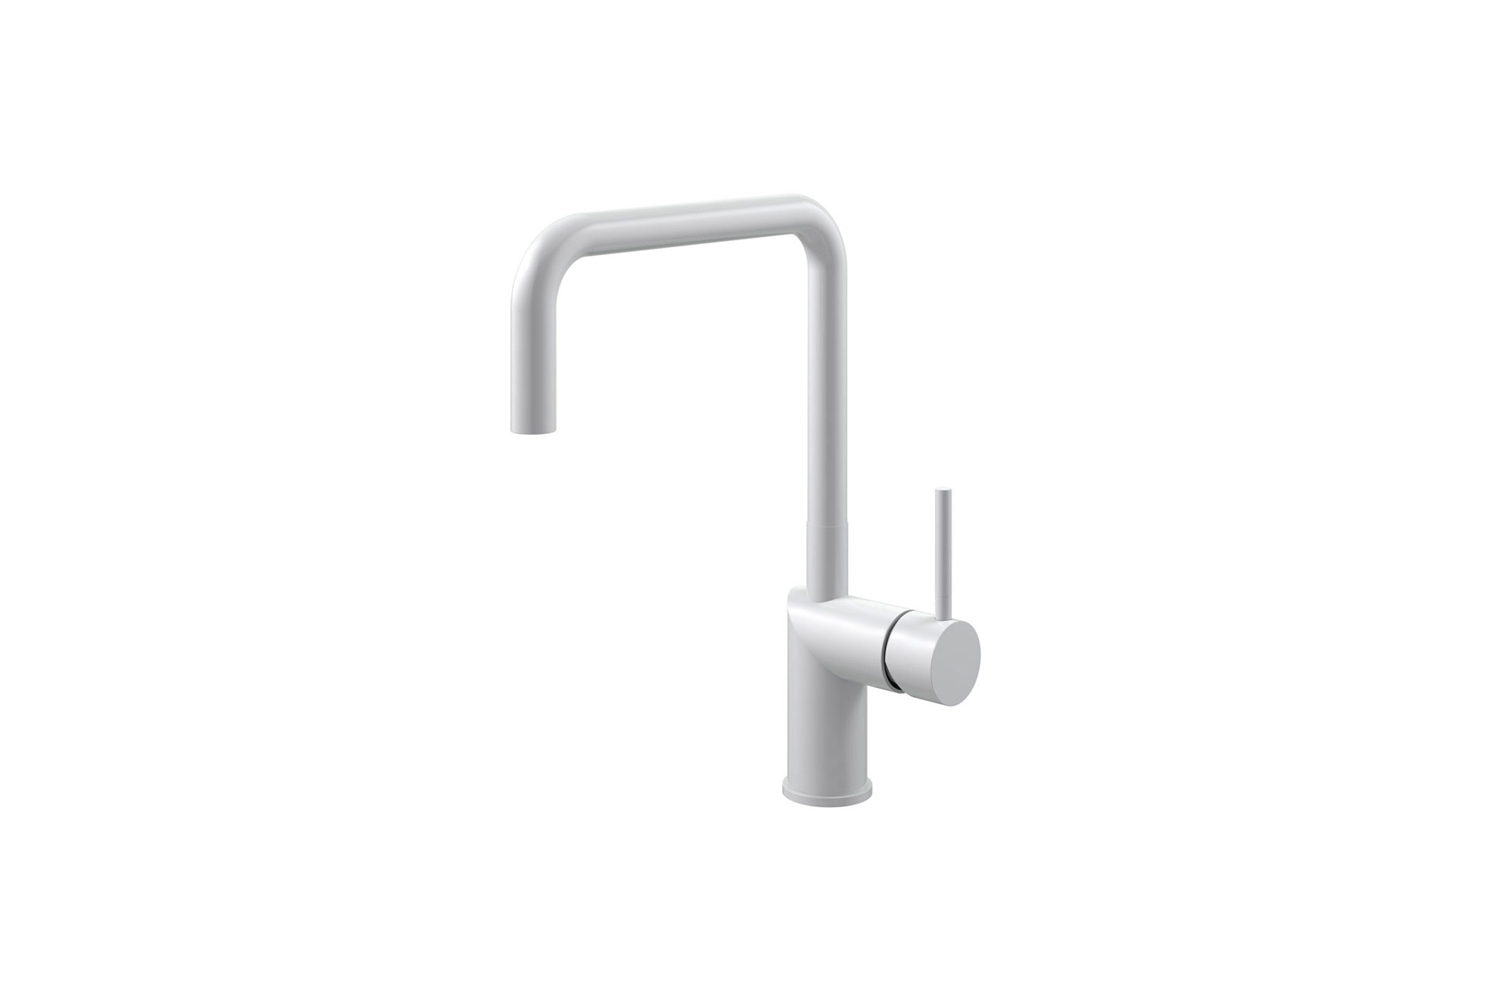 the kitchen faucet is the nivito rh 330 faucet in matte white; $620. 12